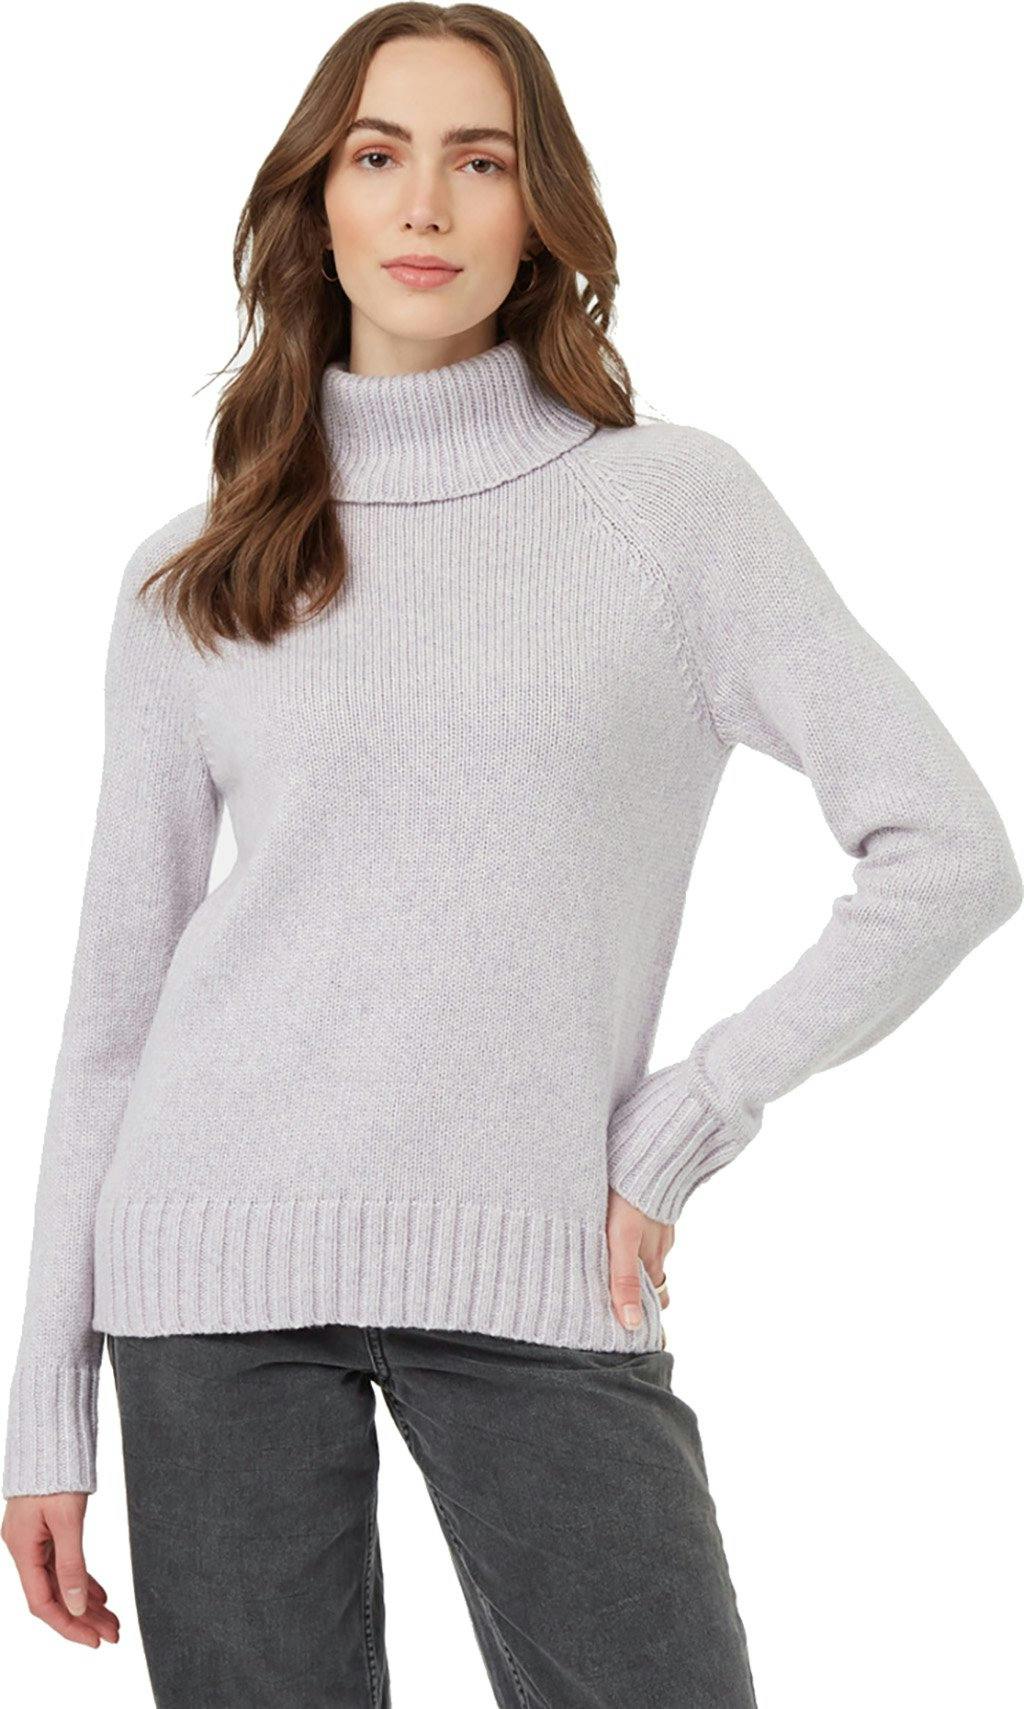 Product image for Highline Wool Turtleneck Sweater - Women's